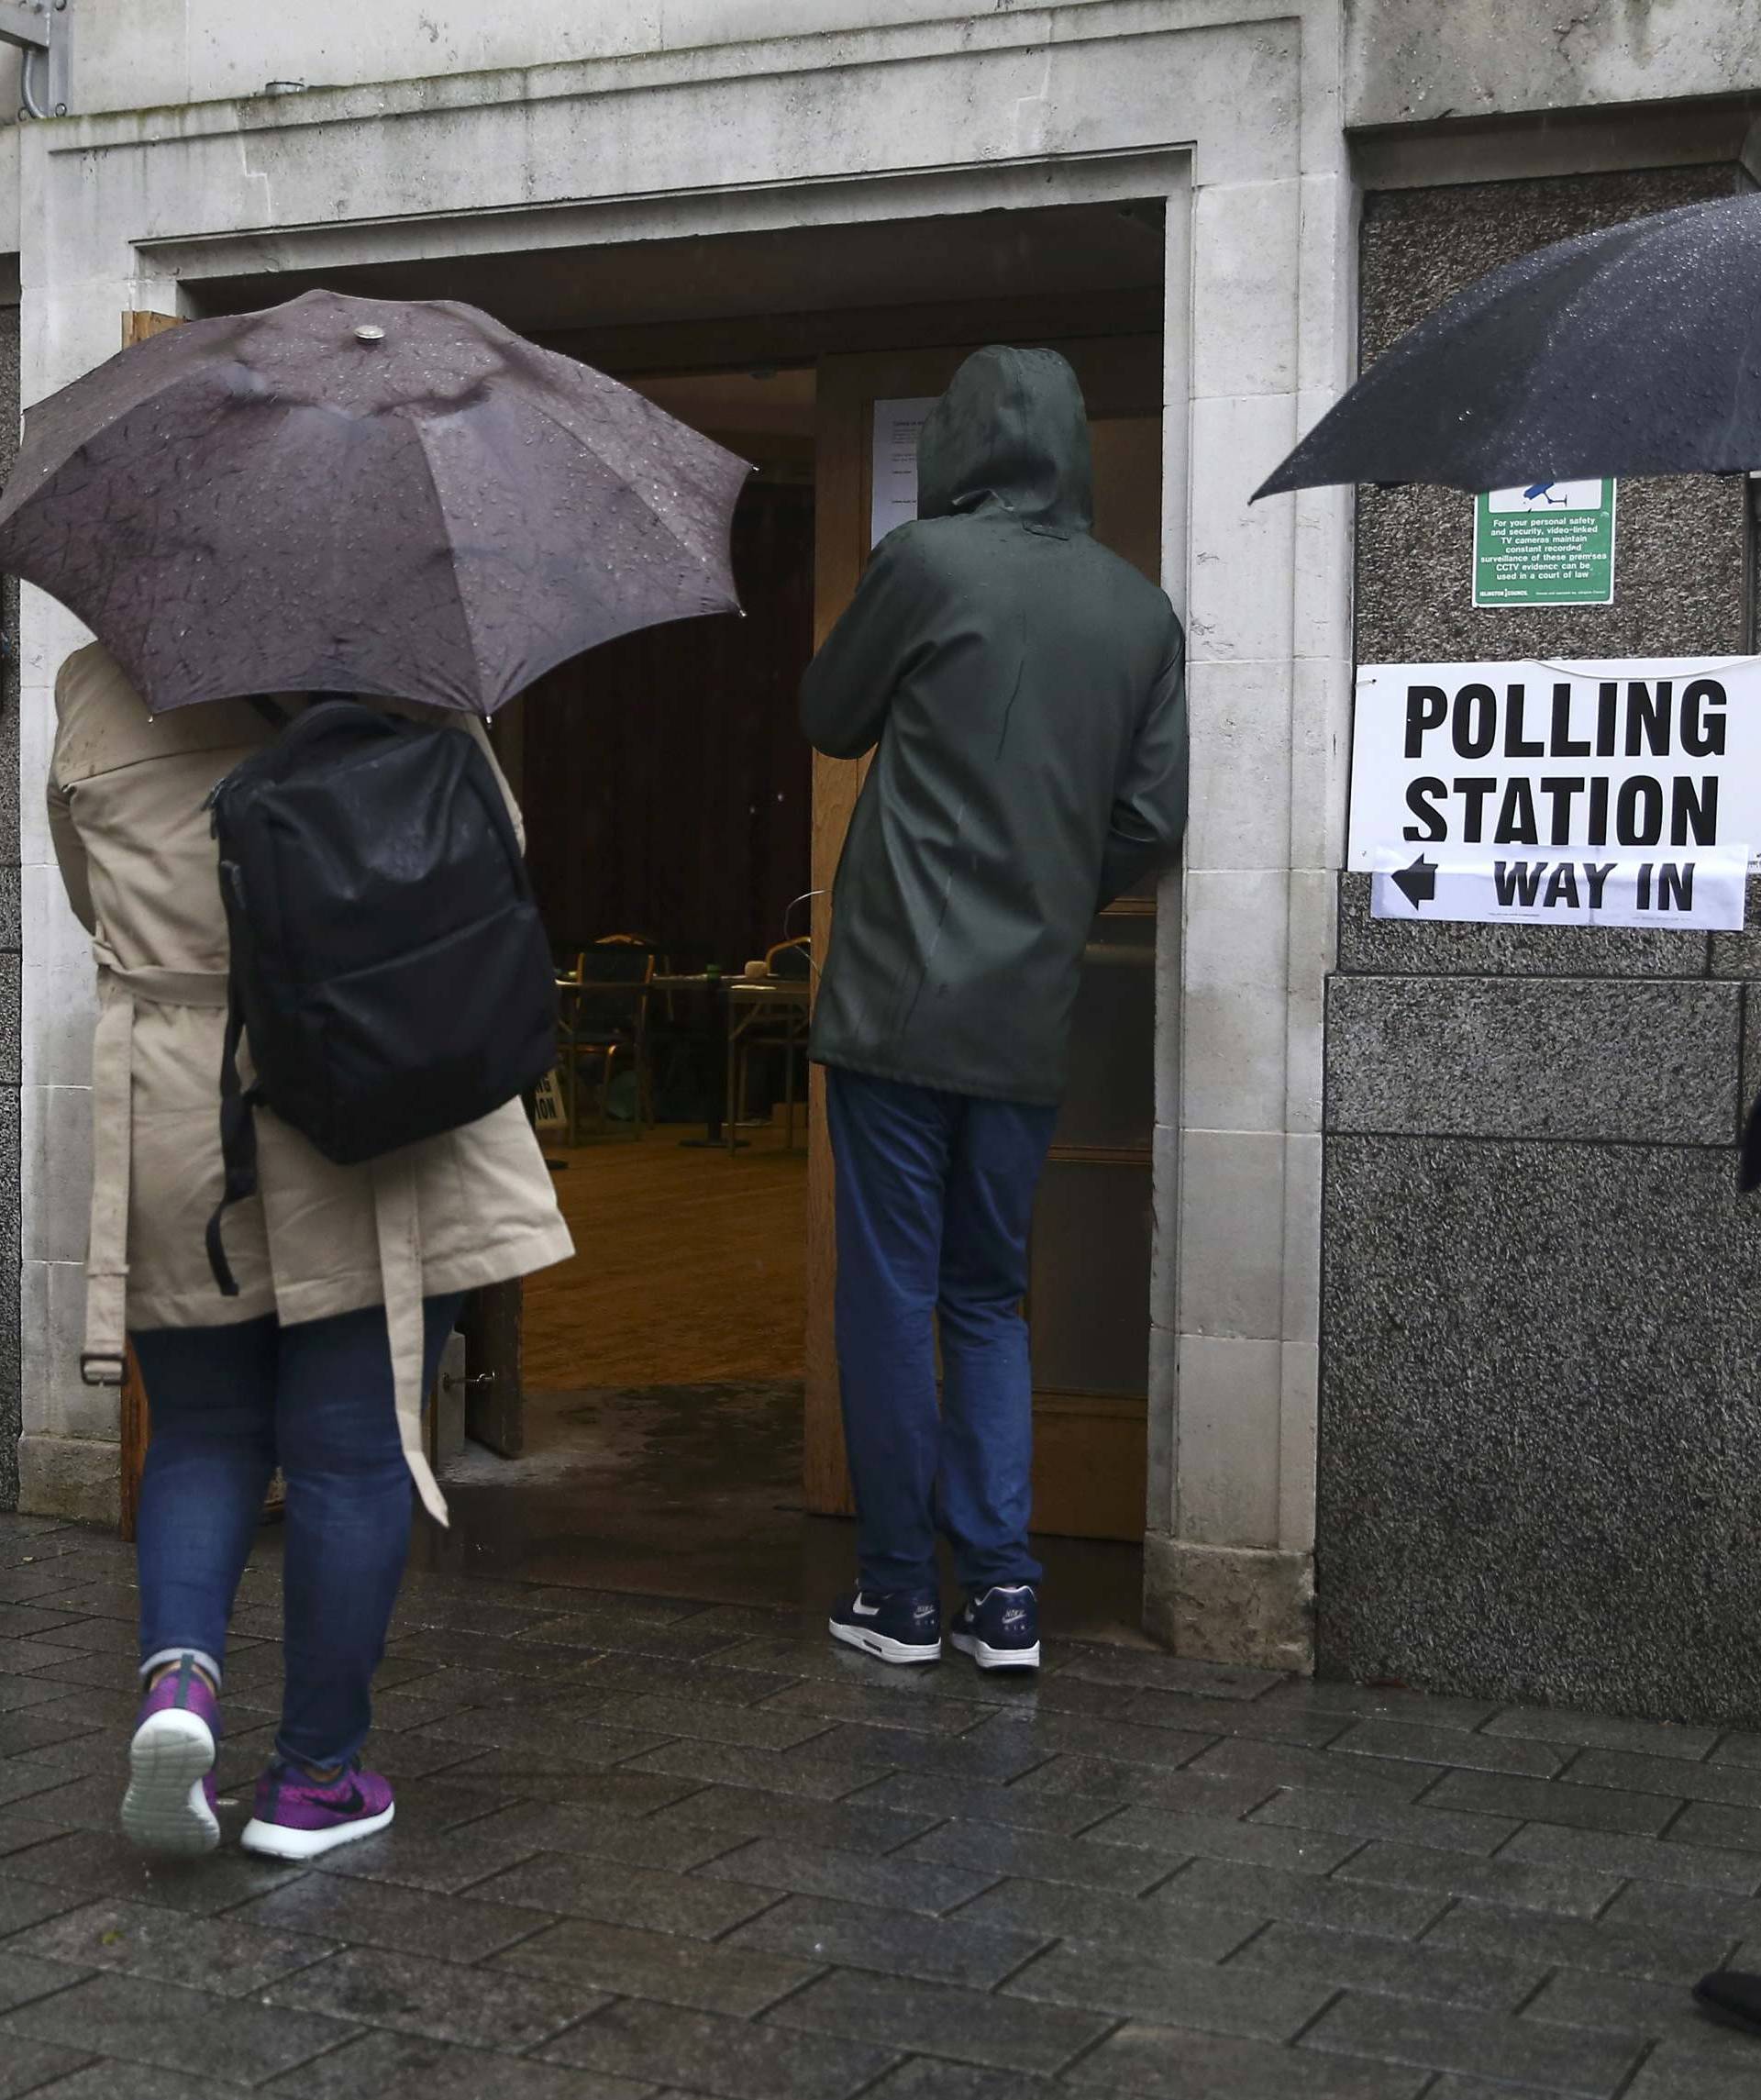 People queue in the rain outside a polling station for the Referendum on the European Union in north London, Britain